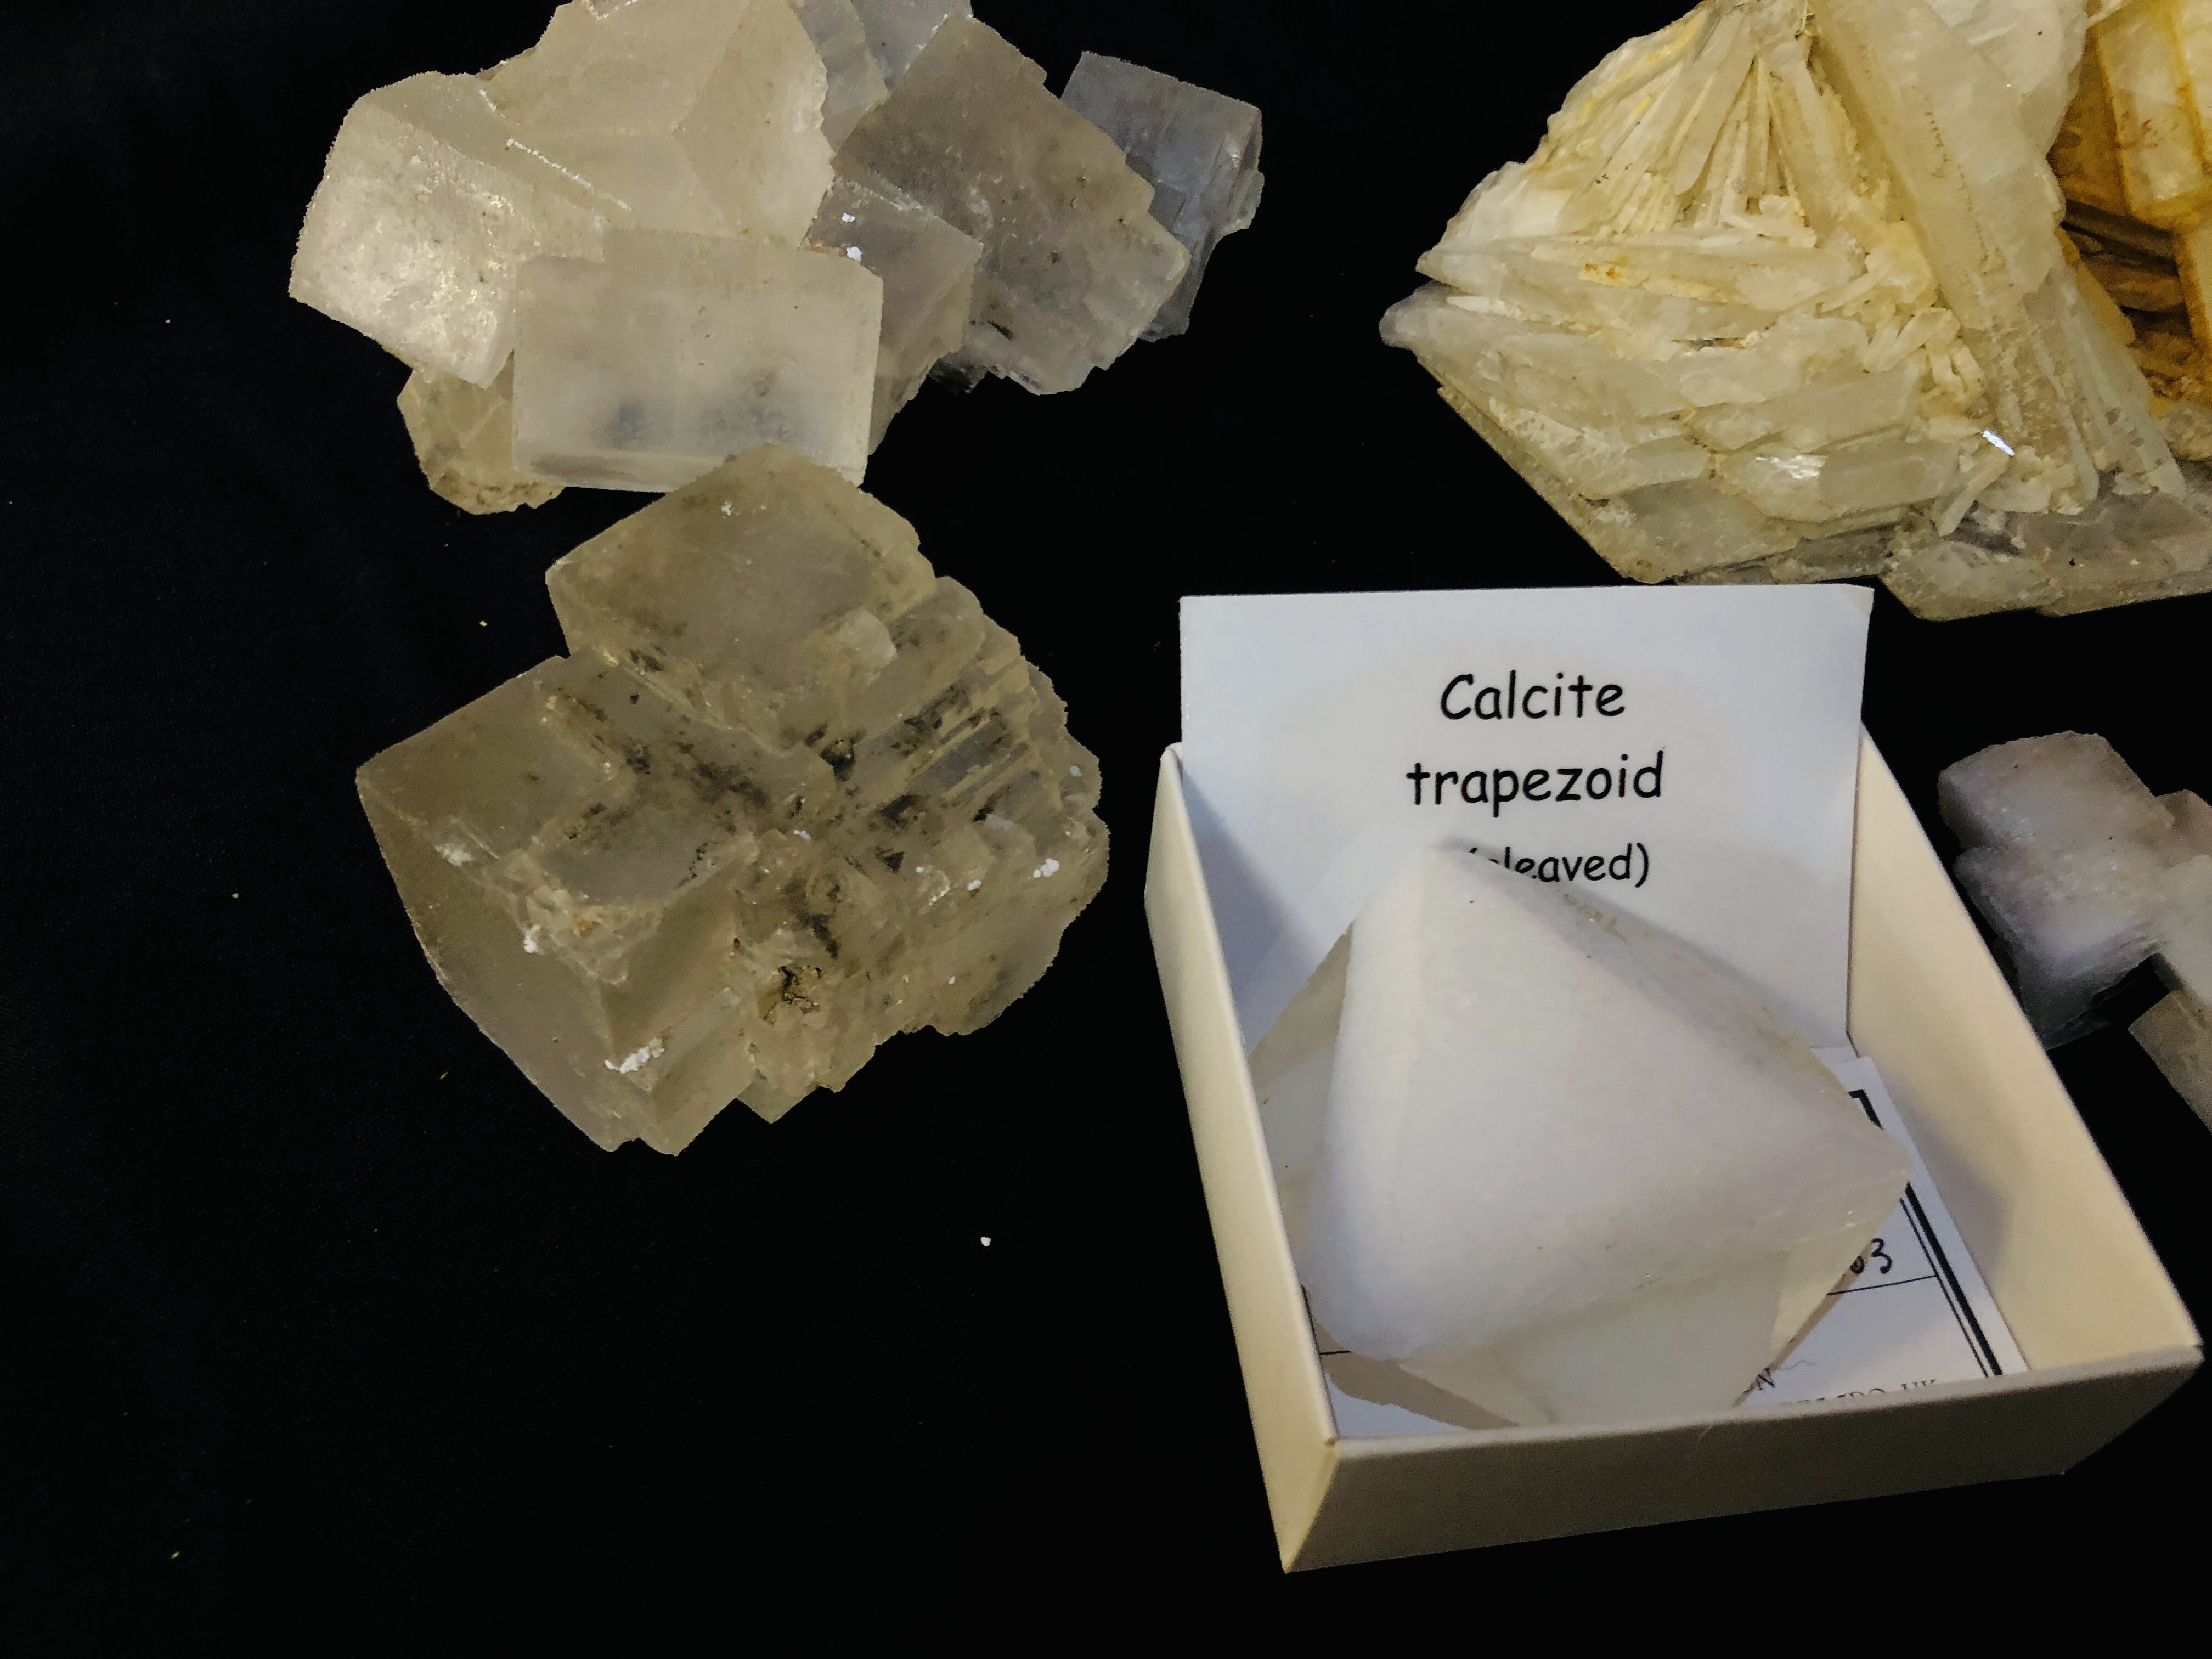 A COLLECTION OF APPROX 5 CRYSTAL AND MINERAL ROCK EXAMPLES TO INCLUDE QUARTZ, CALCITE TRAPEZOID ETC. - Image 5 of 5